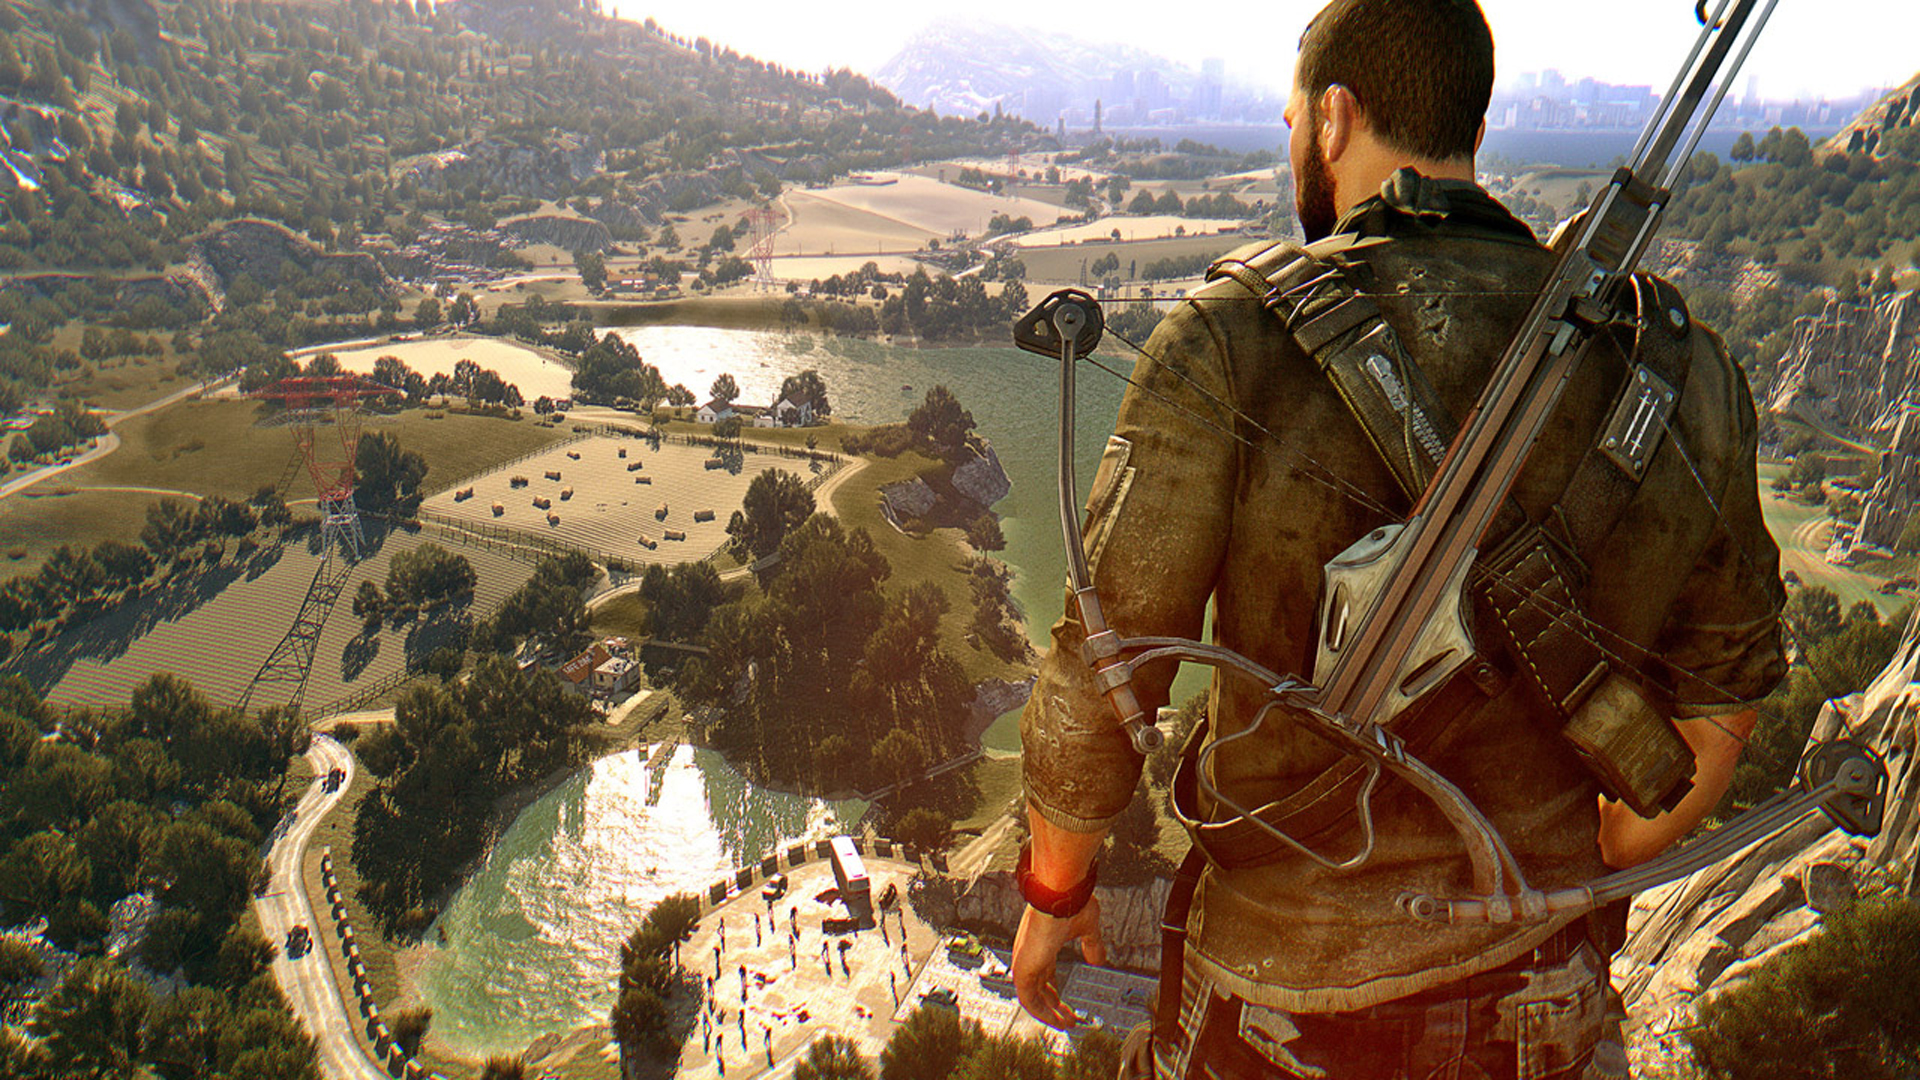 Dying Light characters walk across the screen through a town